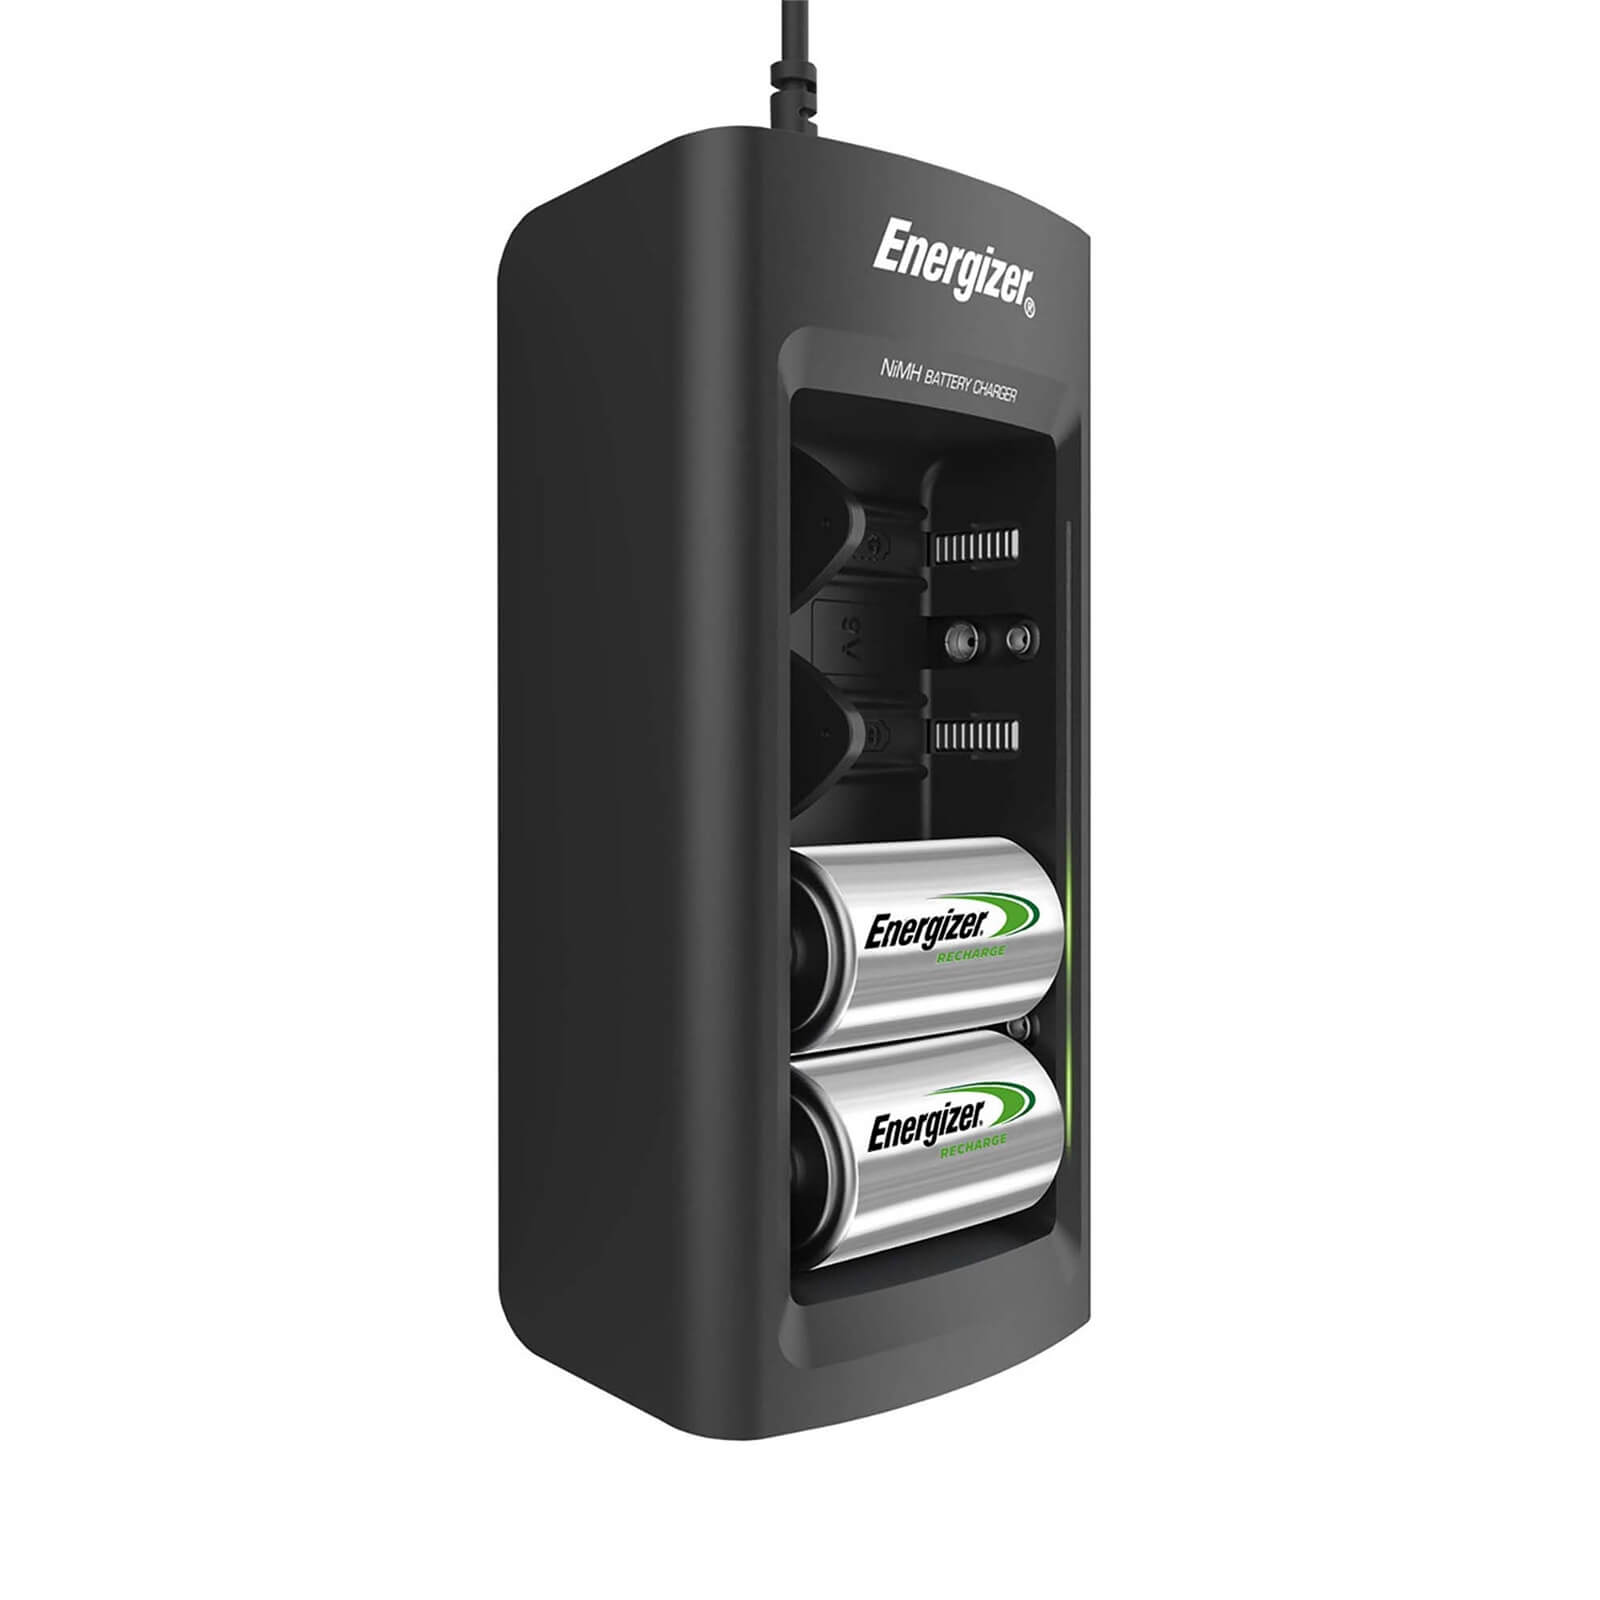 Energizer NiMH Recharge Universal Battery Charger